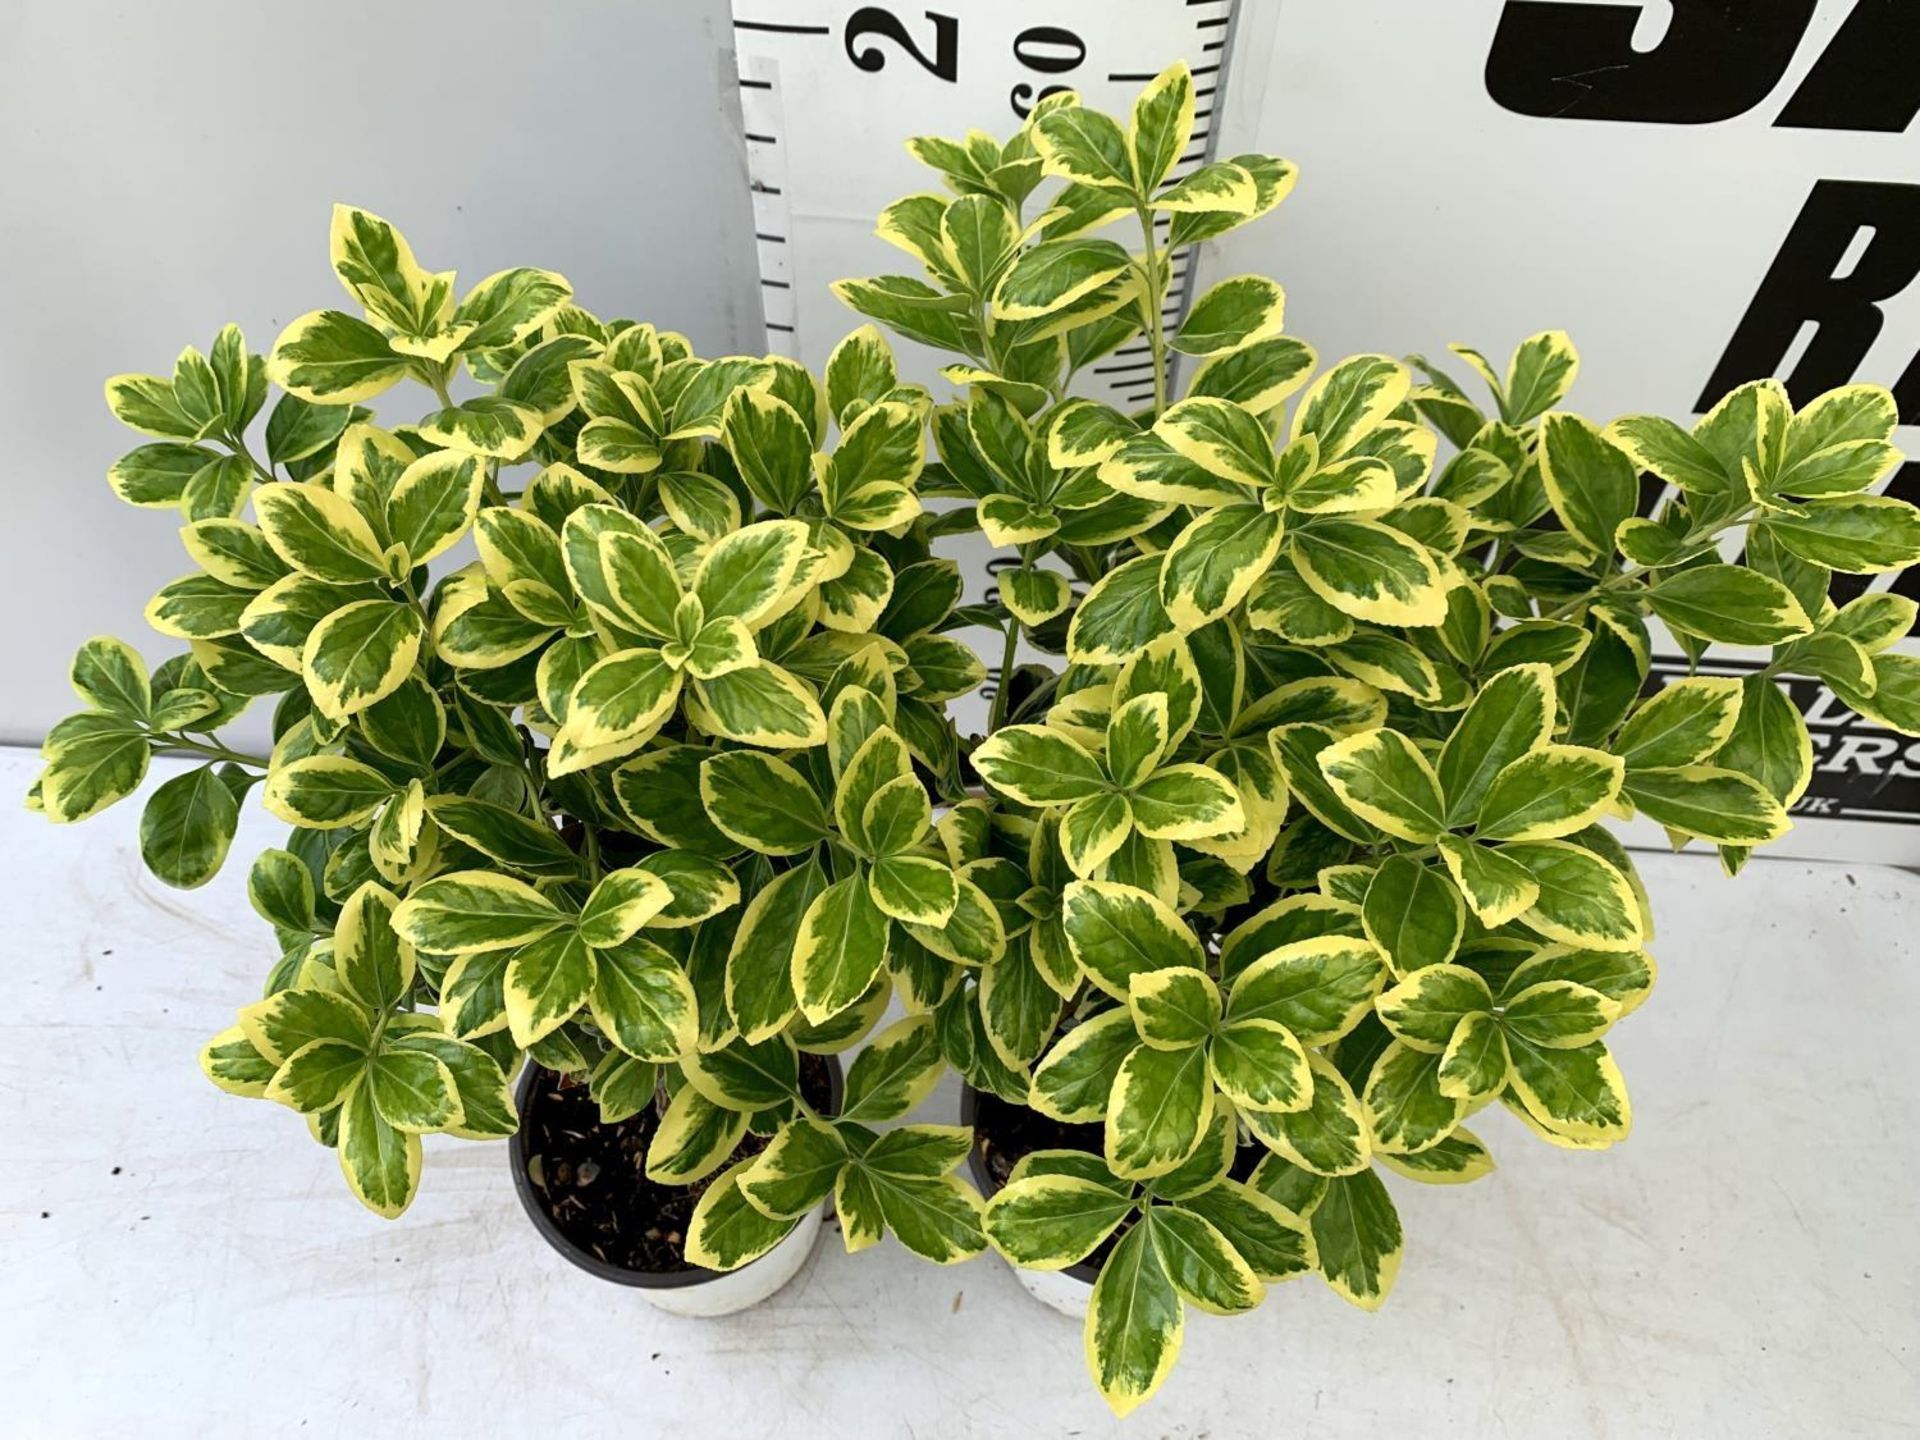 TWO EUONYMUS JAPONICUS STANDARD TREES APPROX 70CM IN HEIGHT IN 2 LTR POTS PLUS VAT TO BE SOLD FOR - Image 4 of 6